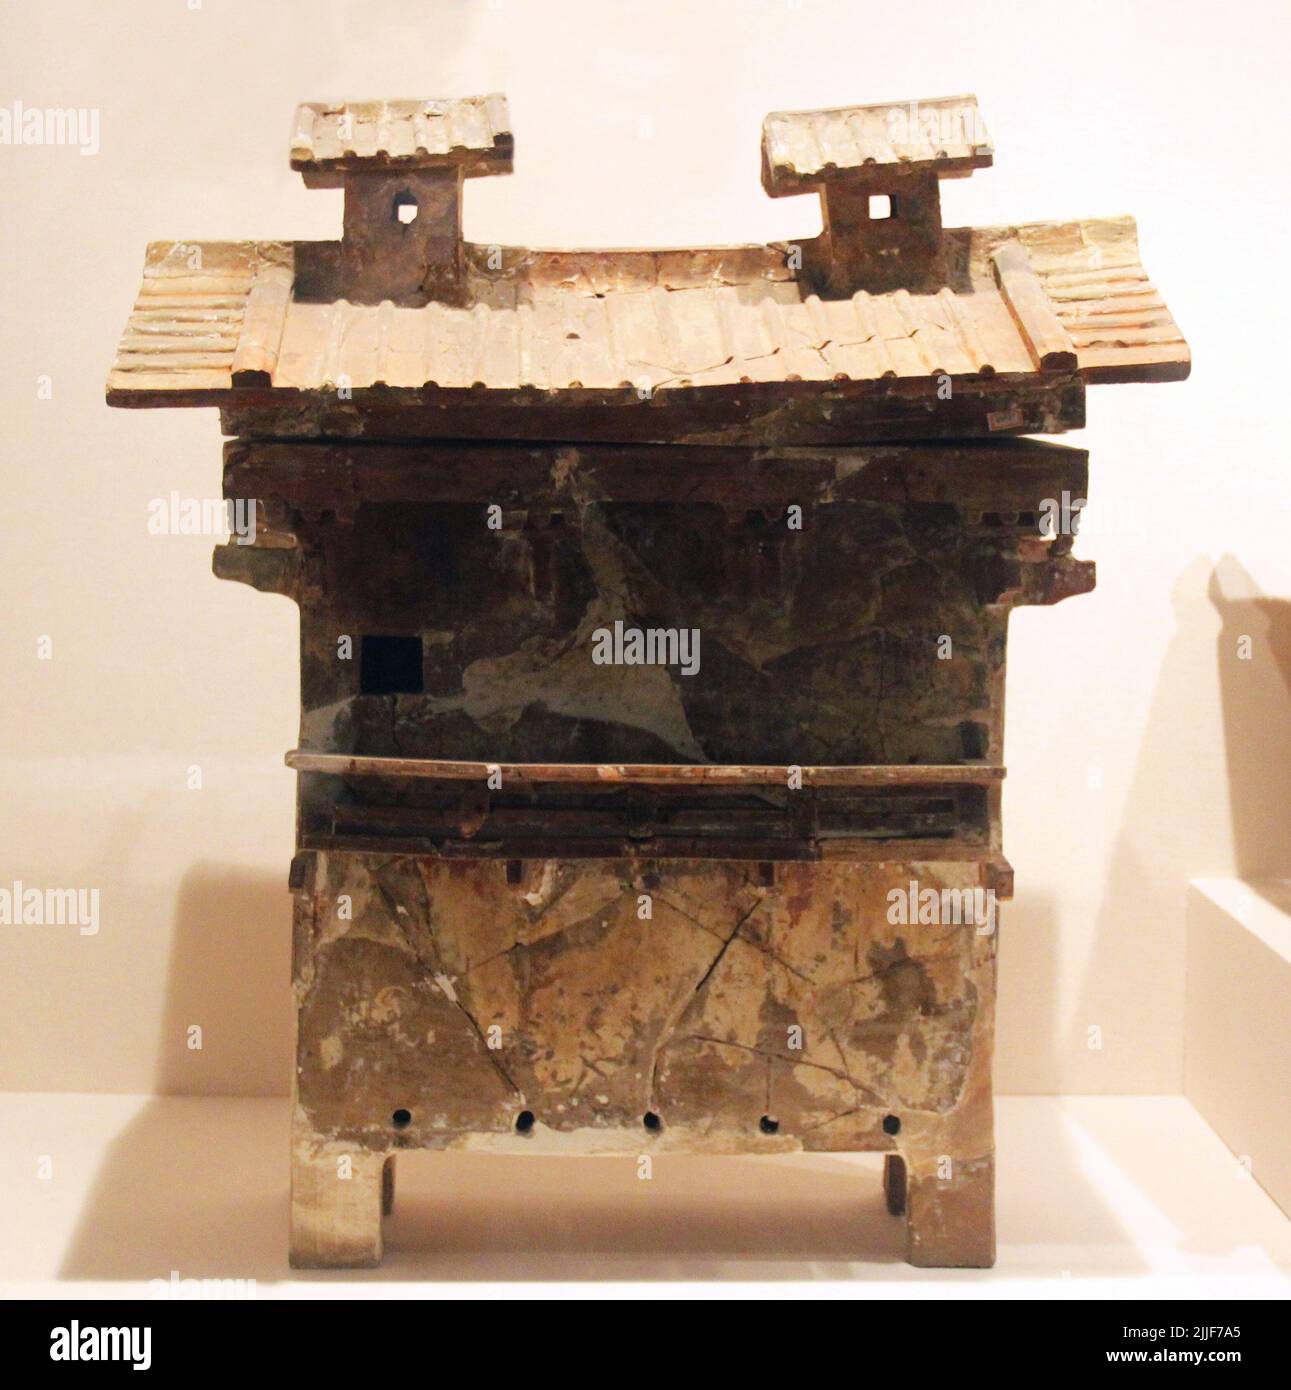 China: Ceramic model of a granary, Eastern Han Dynasty (25-220 CE), Shandong Provincial Museum, Jinan.  The Han Dynasty was an imperial dynasty that ruled during a golden age in Chinese history and has influenced the identity of Chinese civilisation ever since. First established by Emperor Gao (Liu Bang), it was briefly usurped by the Xin Dynasty (9-23 CE), so is separated into two periods: the Western Han (202 BCE - 9 CE) and the Eastern Han (25-220 CE).  Porcelain and ceramics were made in great quantities during the Han Dynasty years, with developments in new techniques and artforms leading Stock Photo